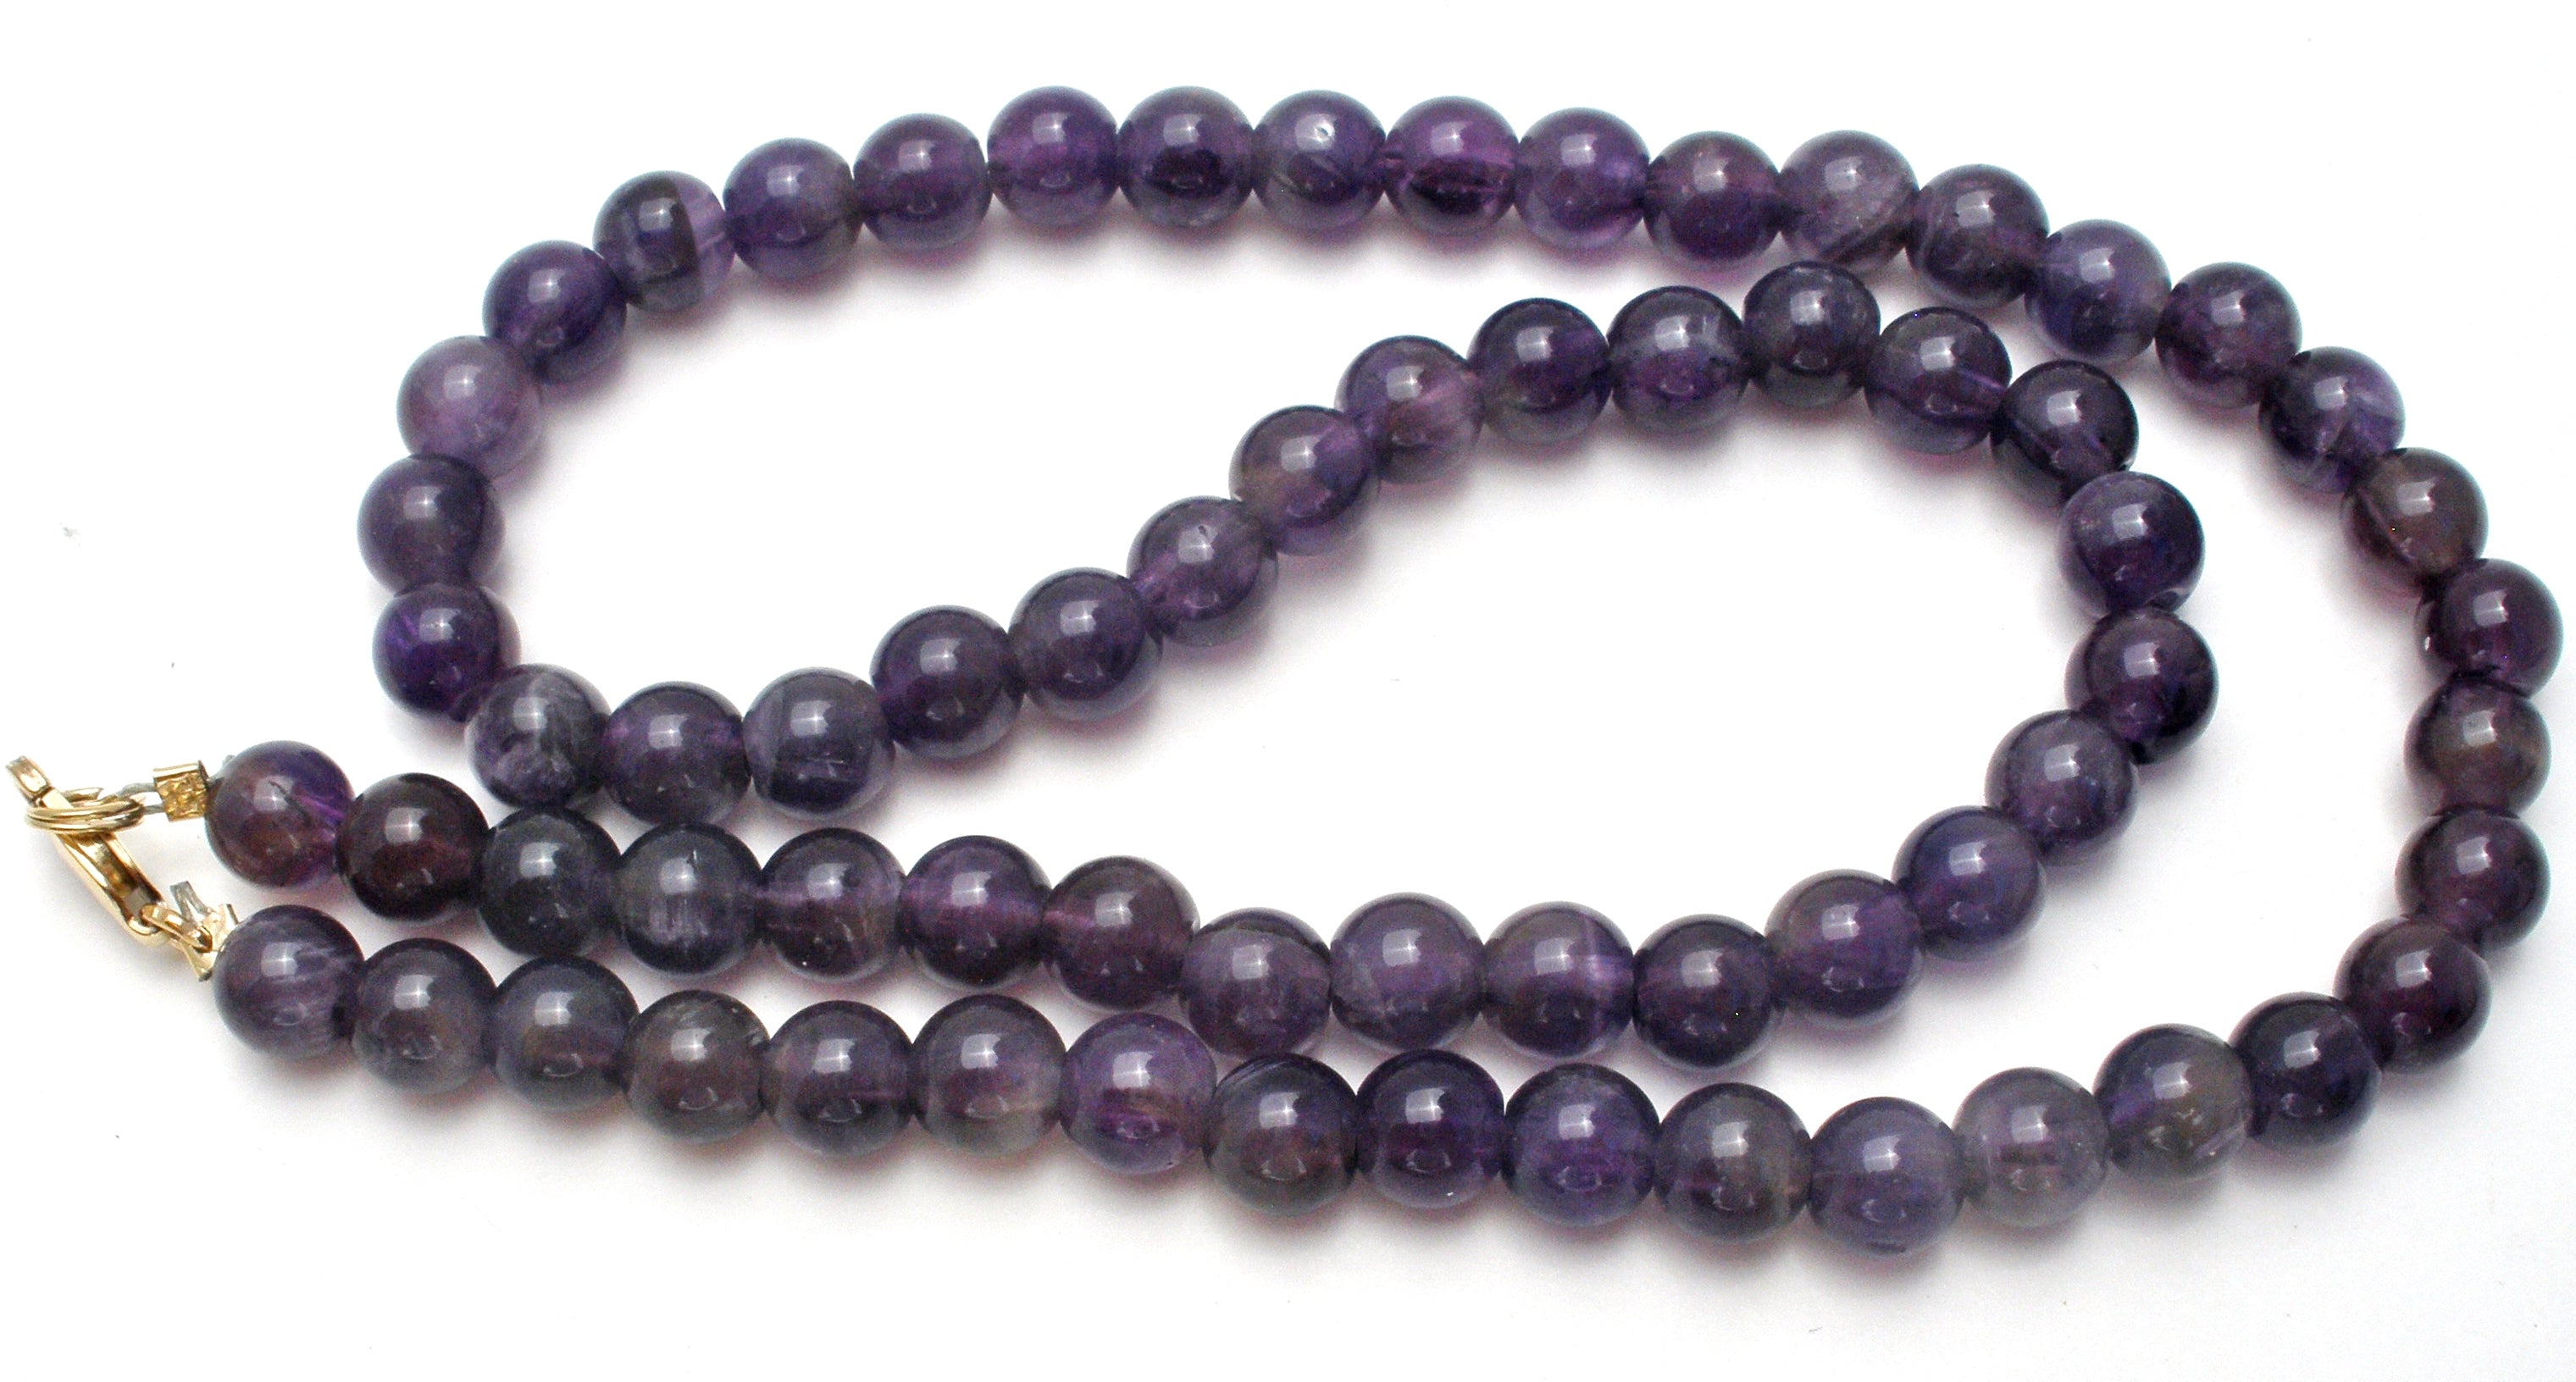 Amethyst Bead Necklace 15.5 Vintage 14K G.F. – The Jewelry Lady's Store